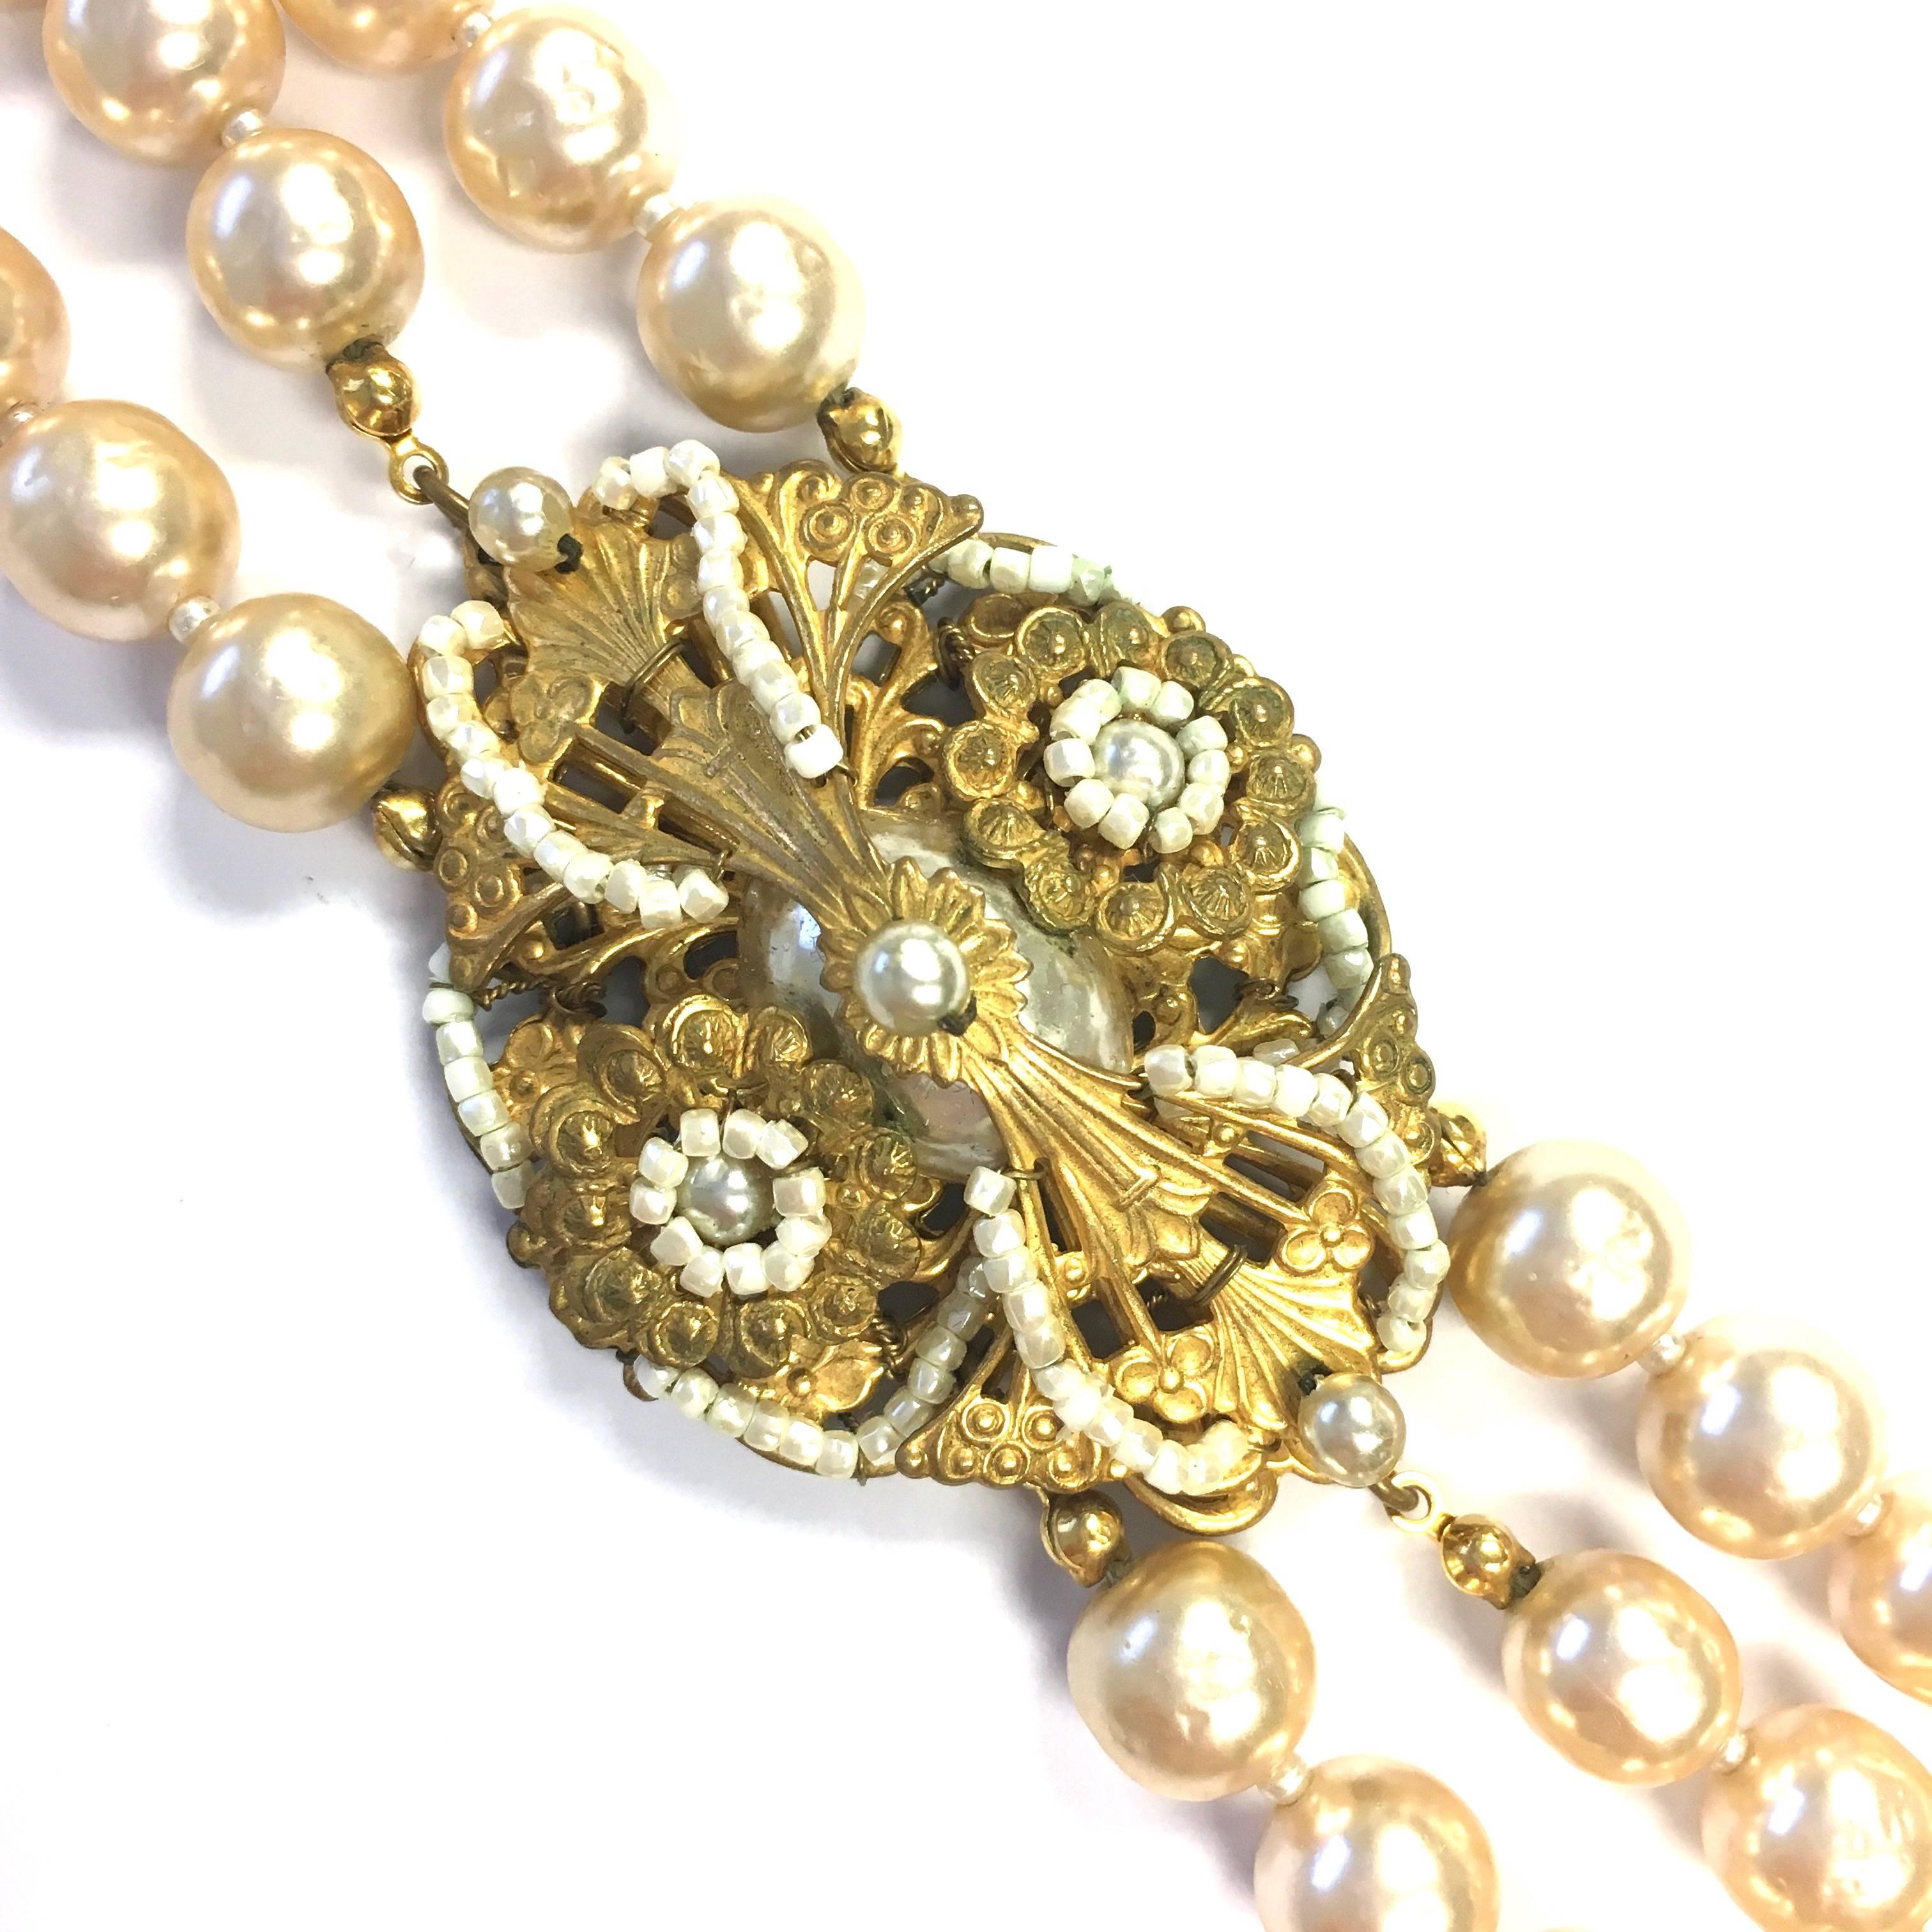 Miriam Haskell faux crinkled cream pearls choker necklace with intricate center piece. Circa 1950's. The pearls measure from 8 mm up to 10.5 mm in diameter. The necklace measures 14 inches in length. 